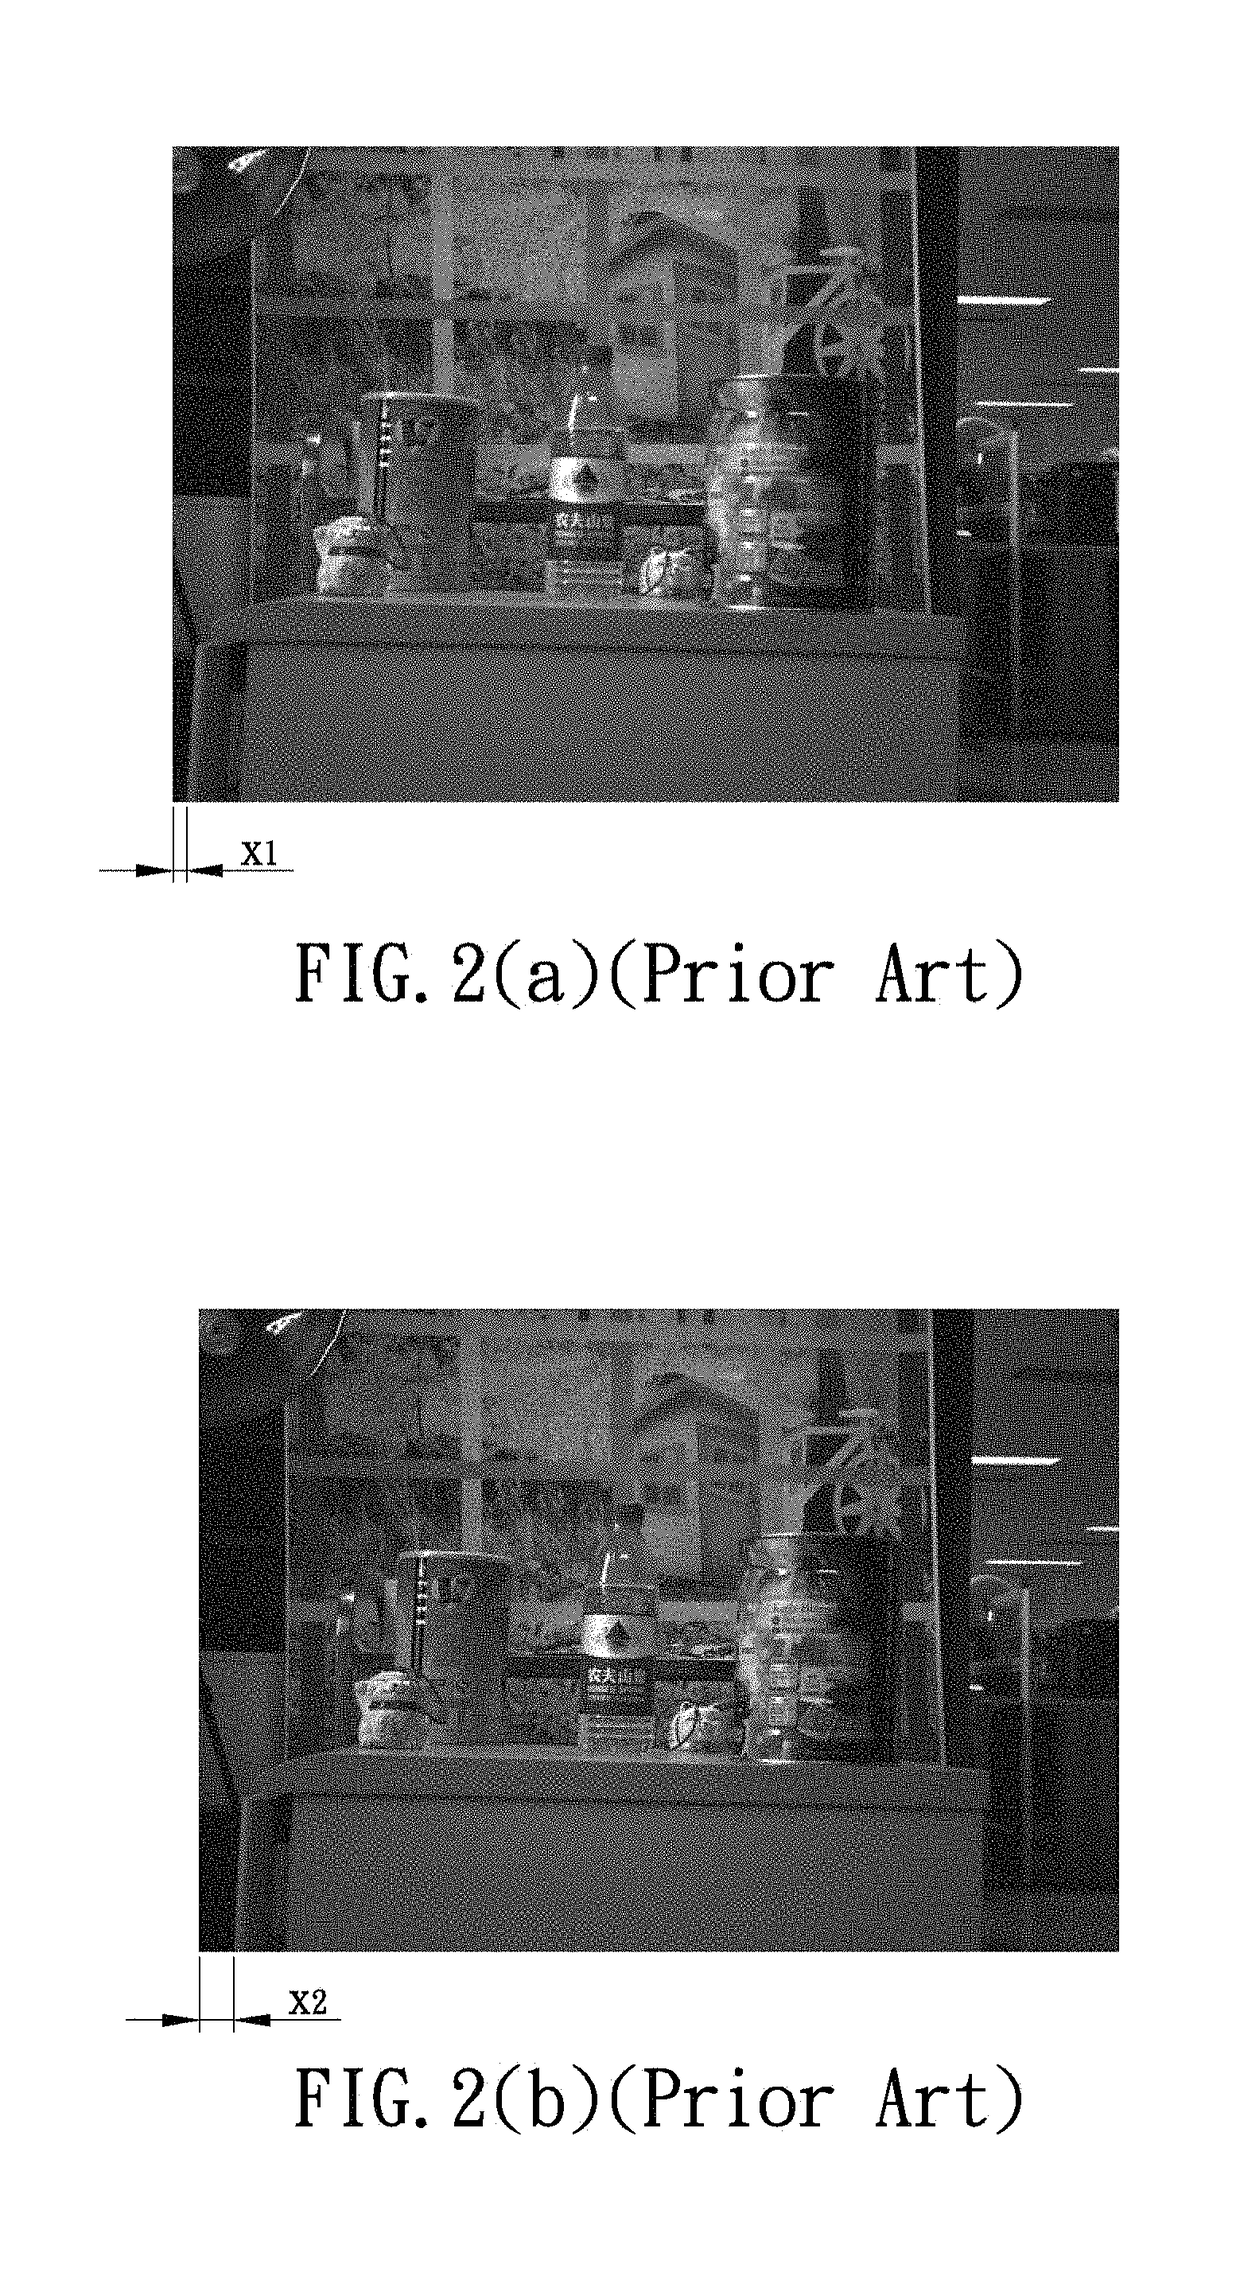 Method of utilizing wide-angle image capturing element and long-focus image capturing element for achieving clear and precise optical zooming mechanism